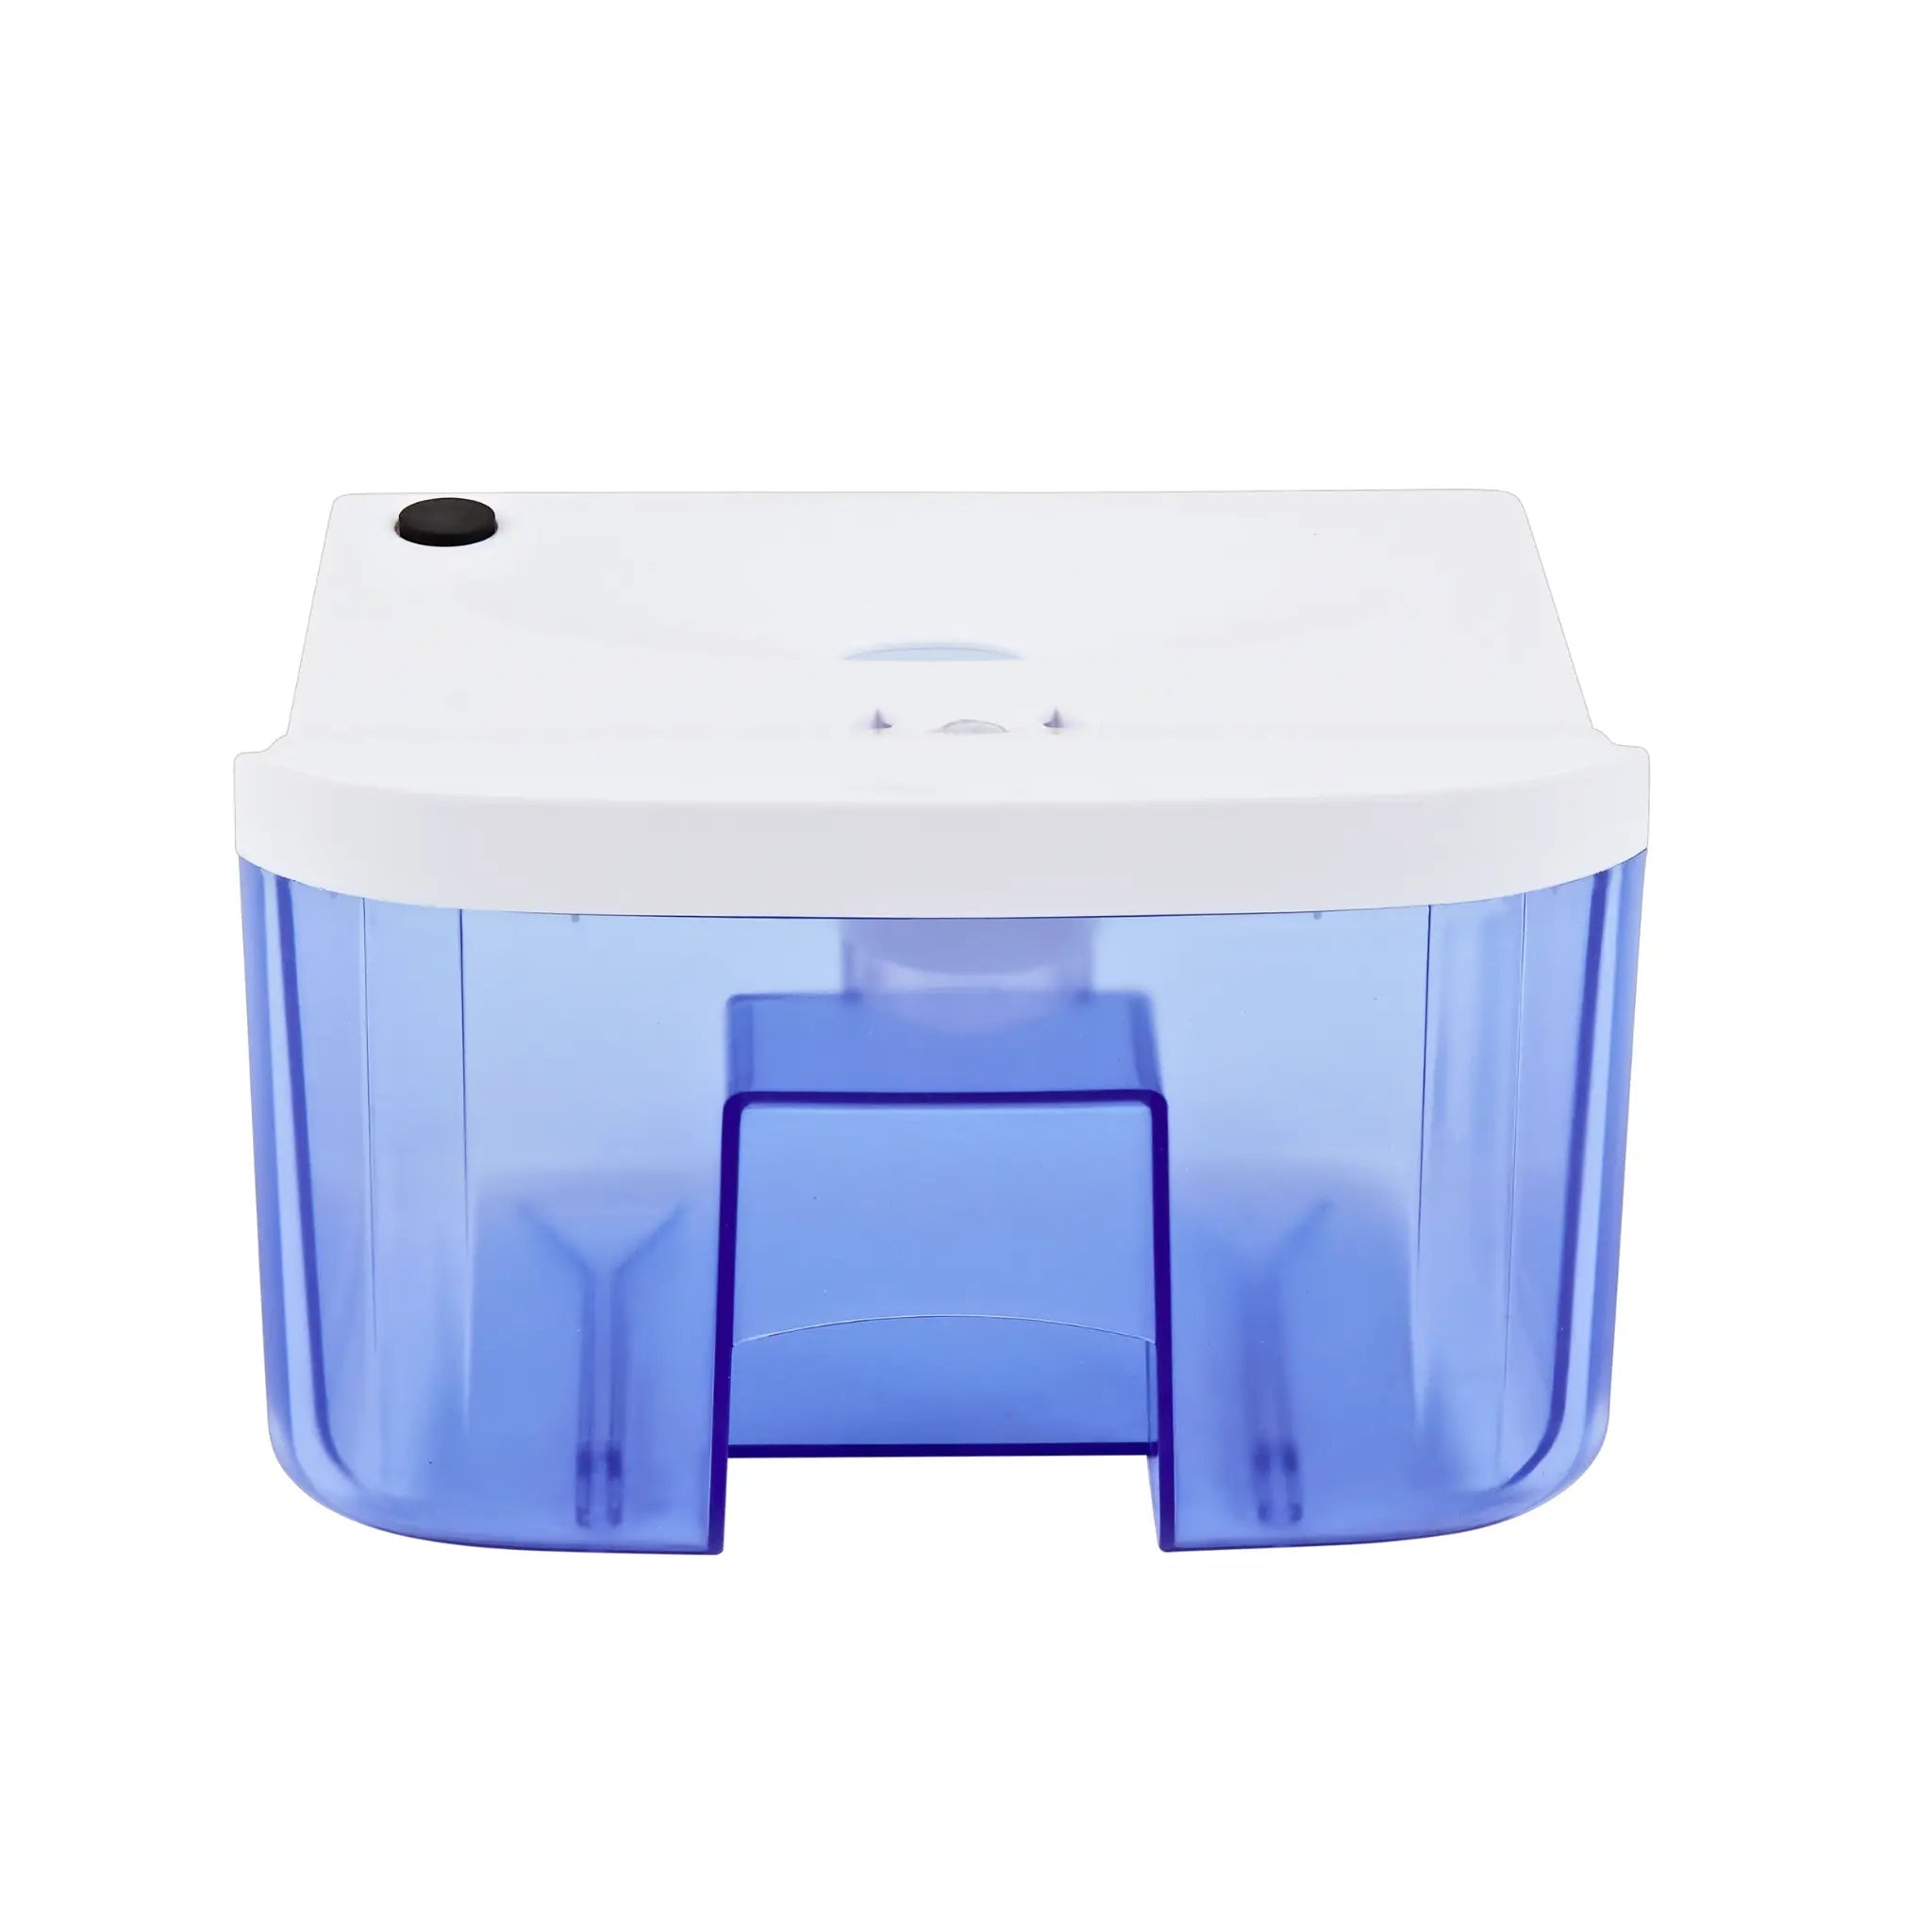 The water tank for the Senelux 750ml dehumidifier on its own. The water tank is mostly see-through purple for easy water viewing.